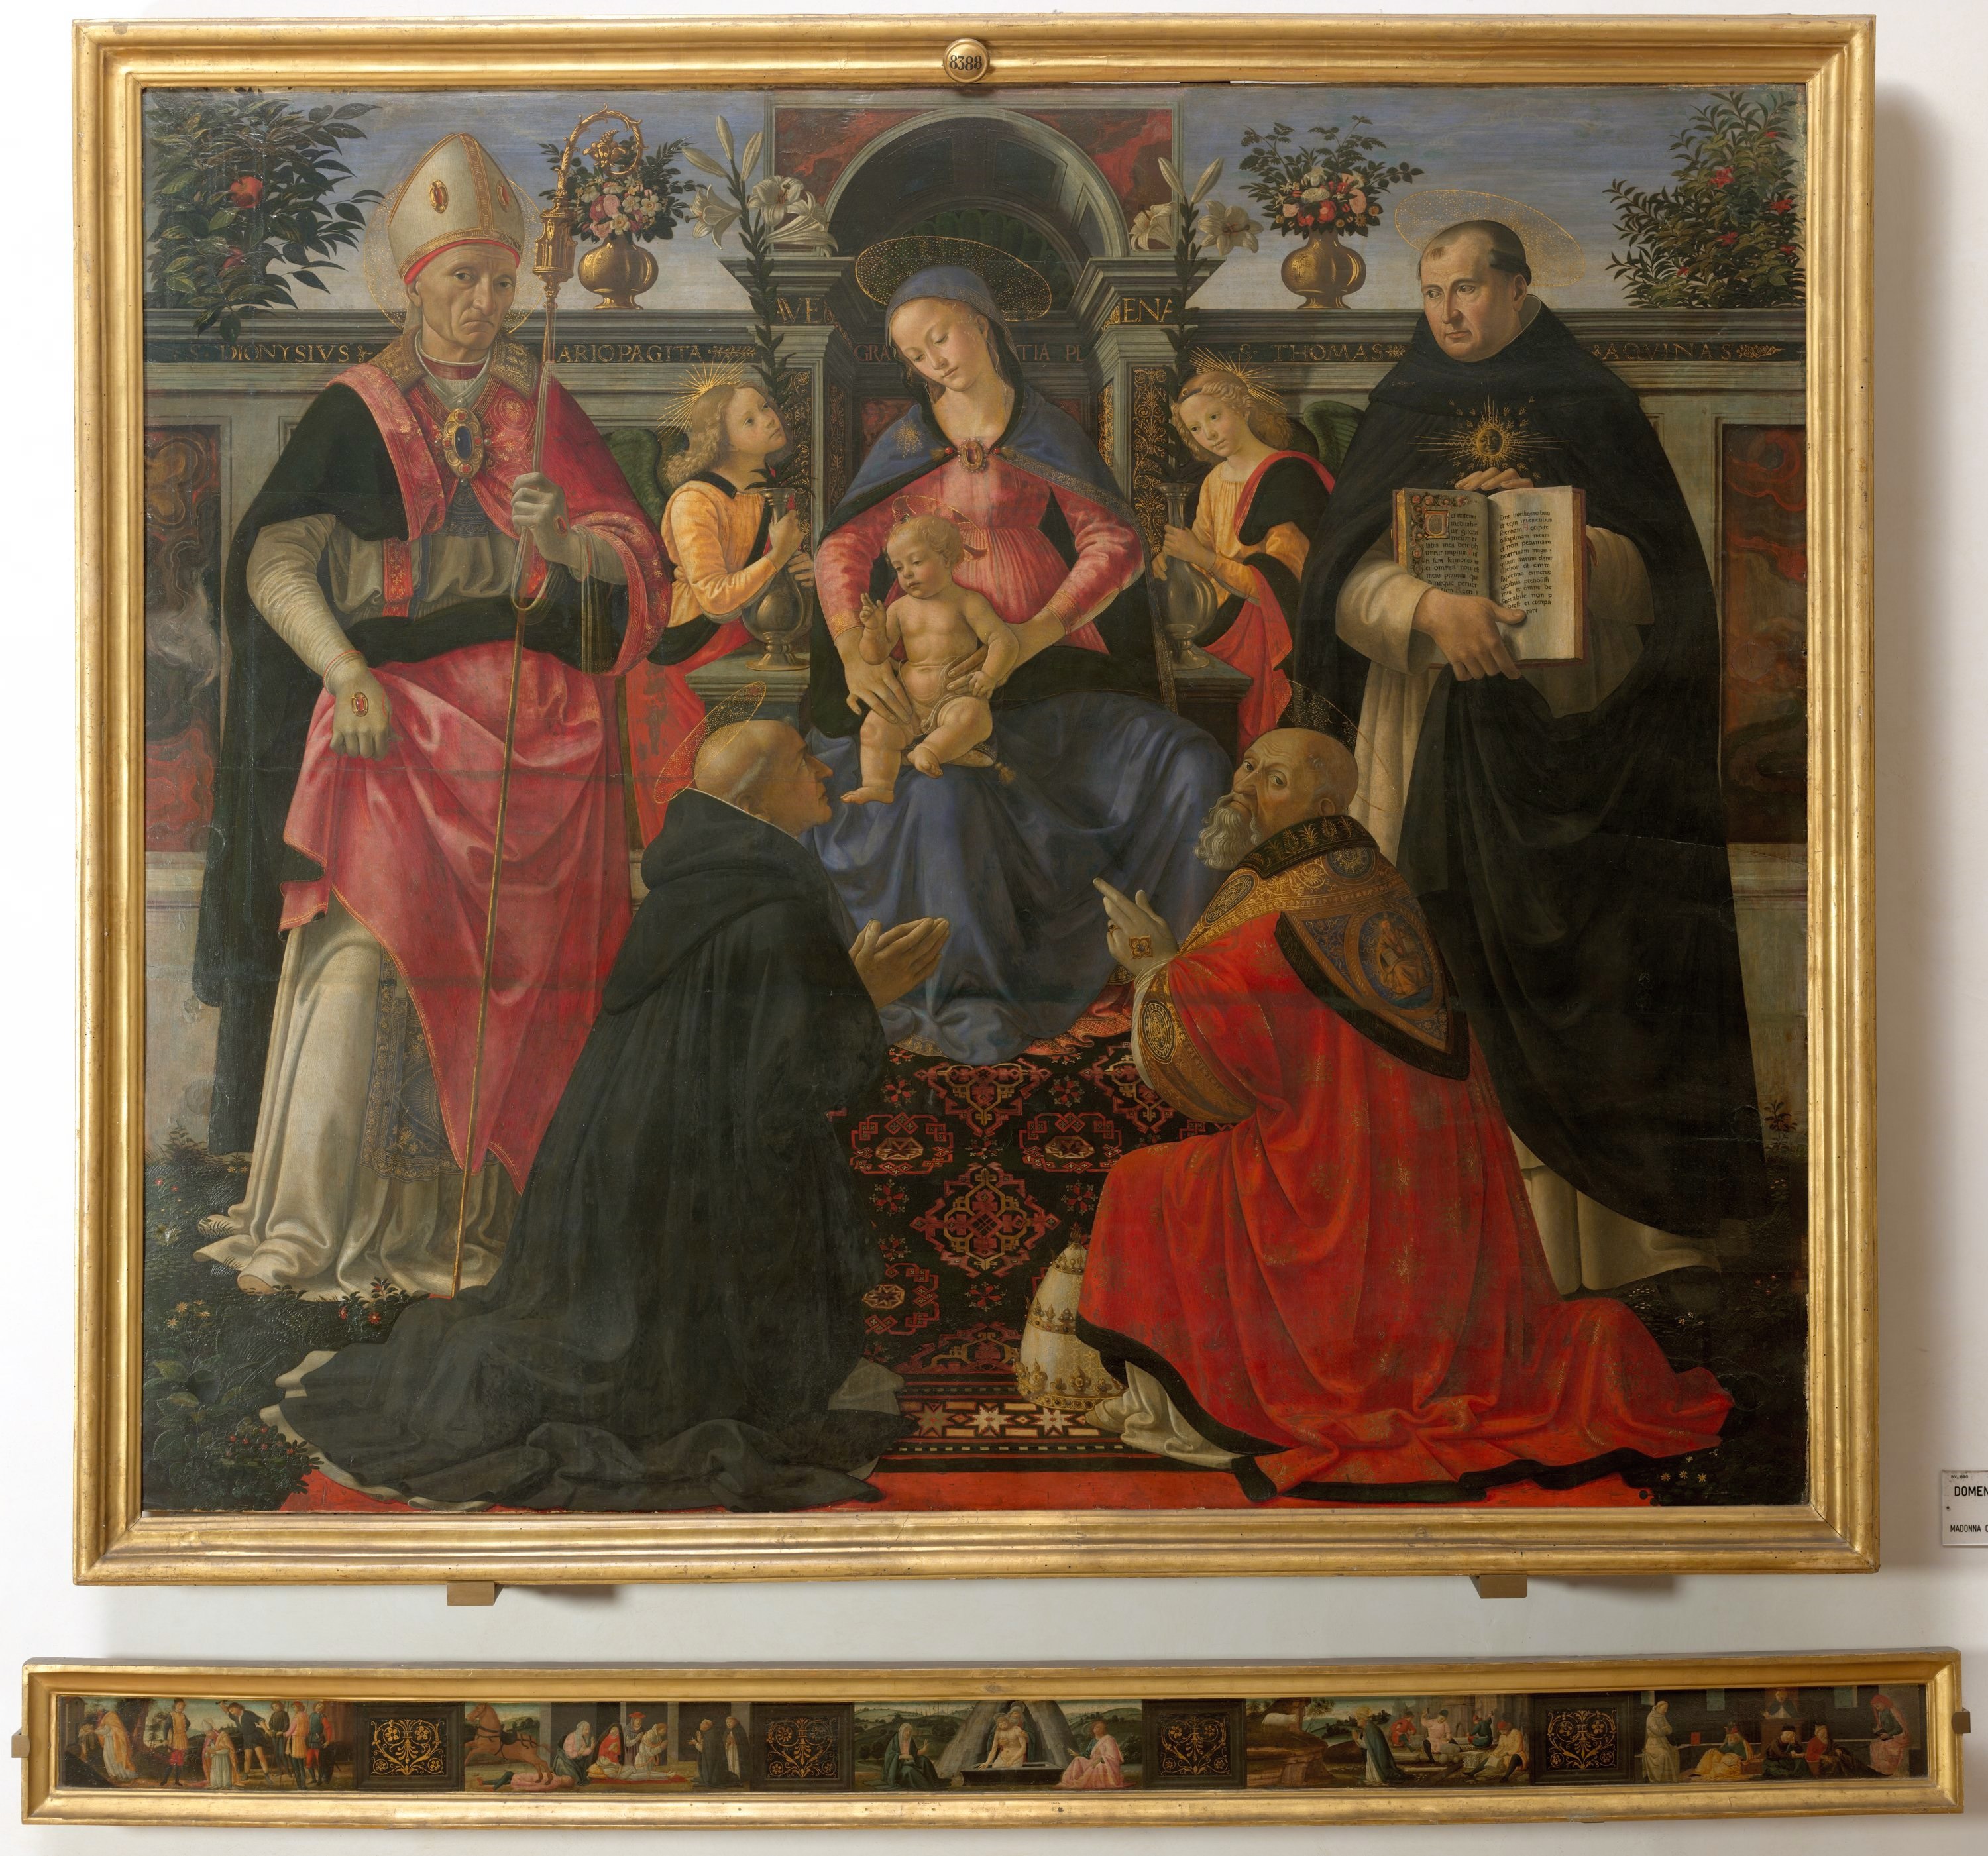 Madonna and Child enthroned with Saints Dionysius the Areopagite, Dominic, Clement, Thomas Aquinas and angels